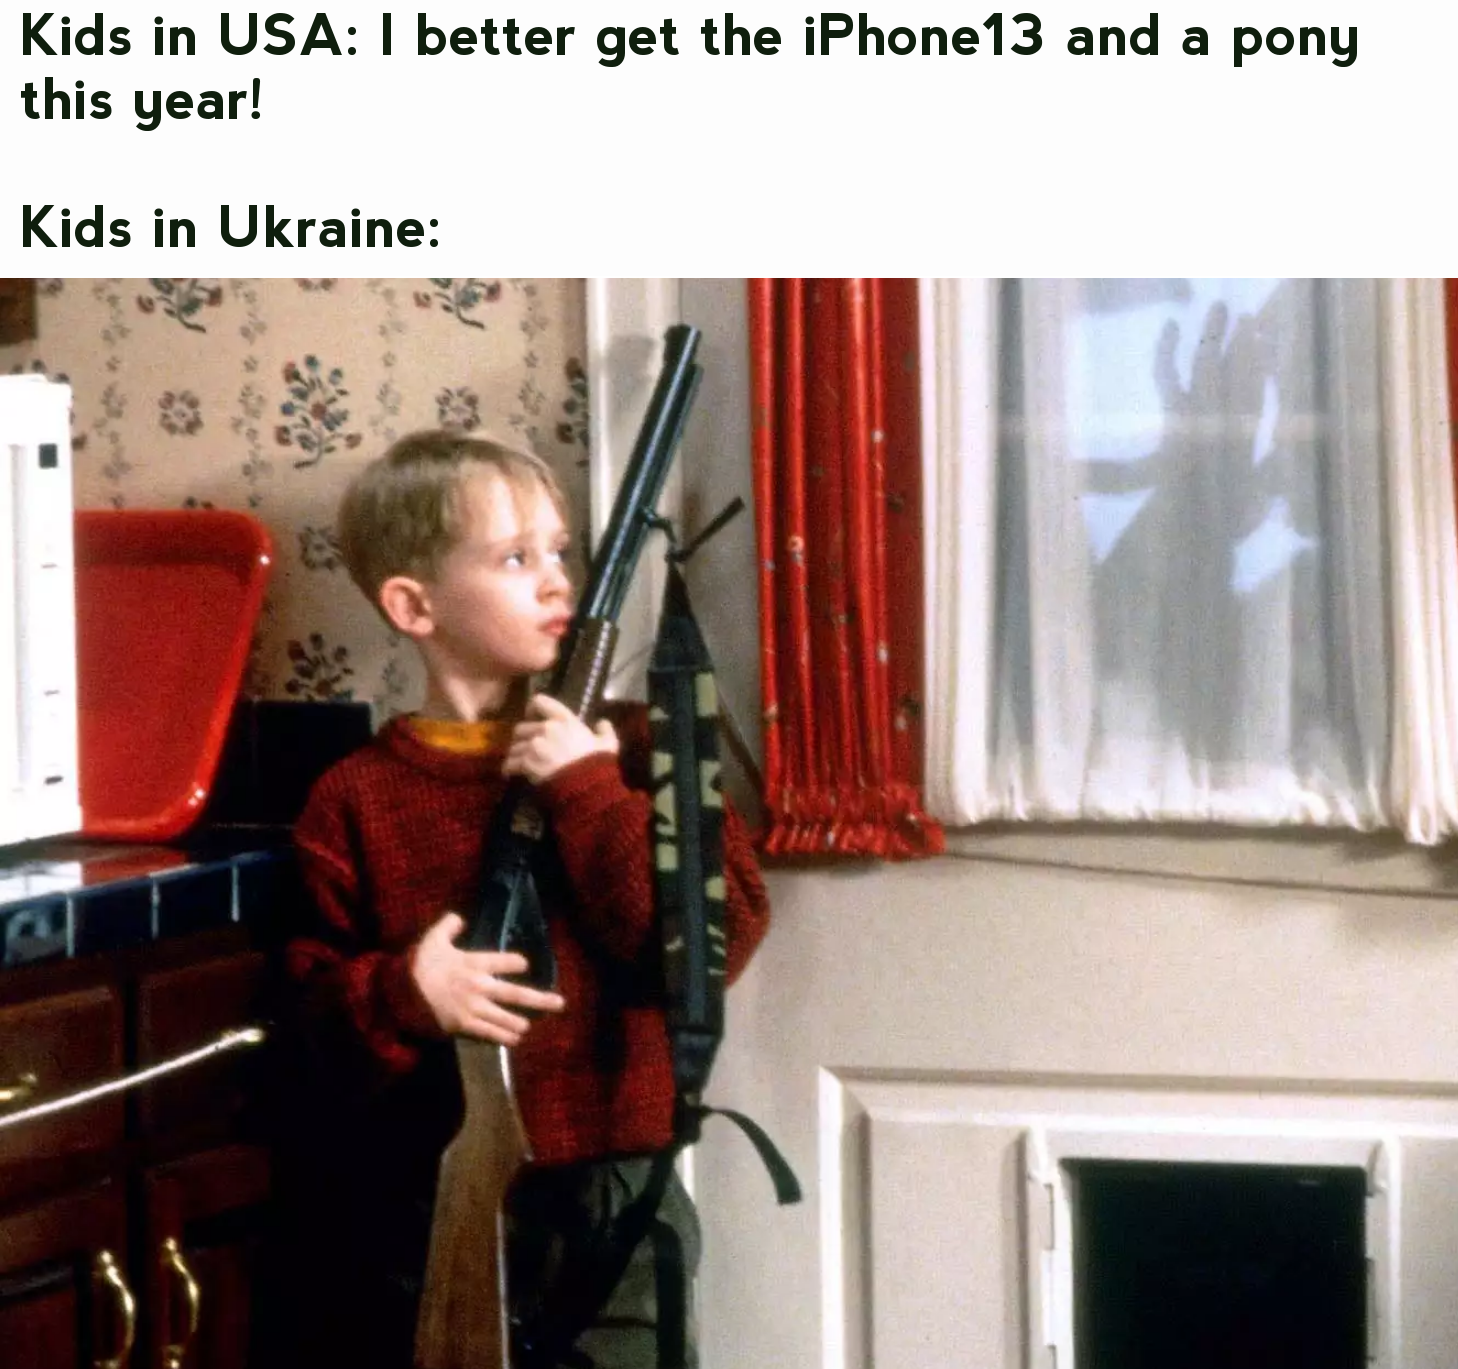 kevin home alone - Kids in Usa I better get the iPhone 13 and a pony this year! Kids in Ukraine